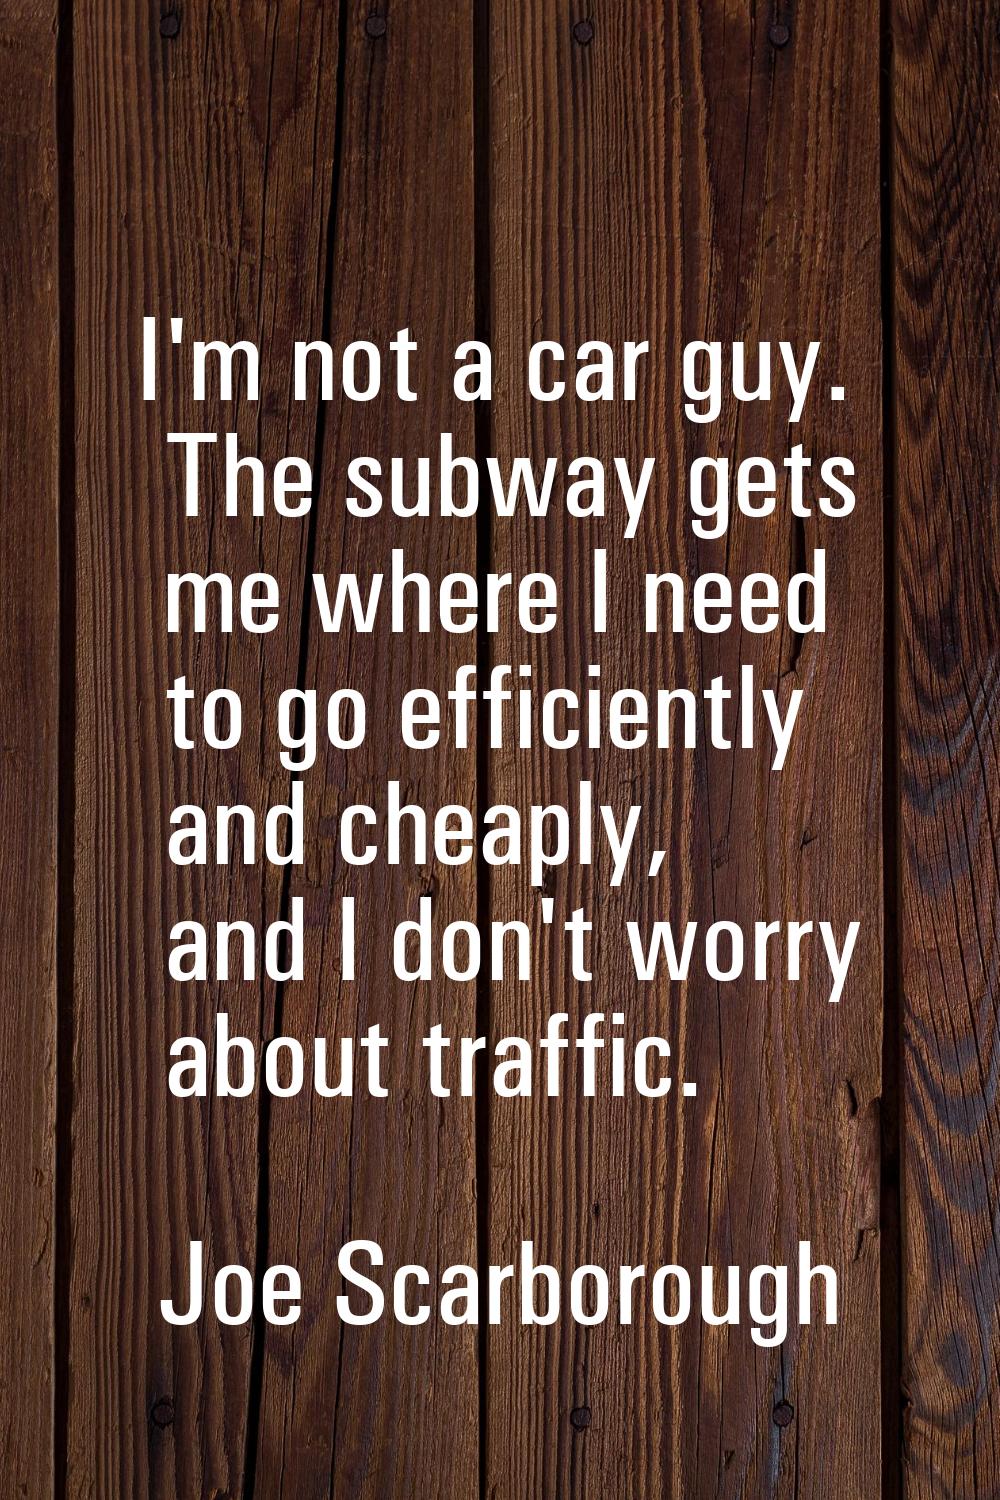 I'm not a car guy. The subway gets me where I need to go efficiently and cheaply, and I don't worry